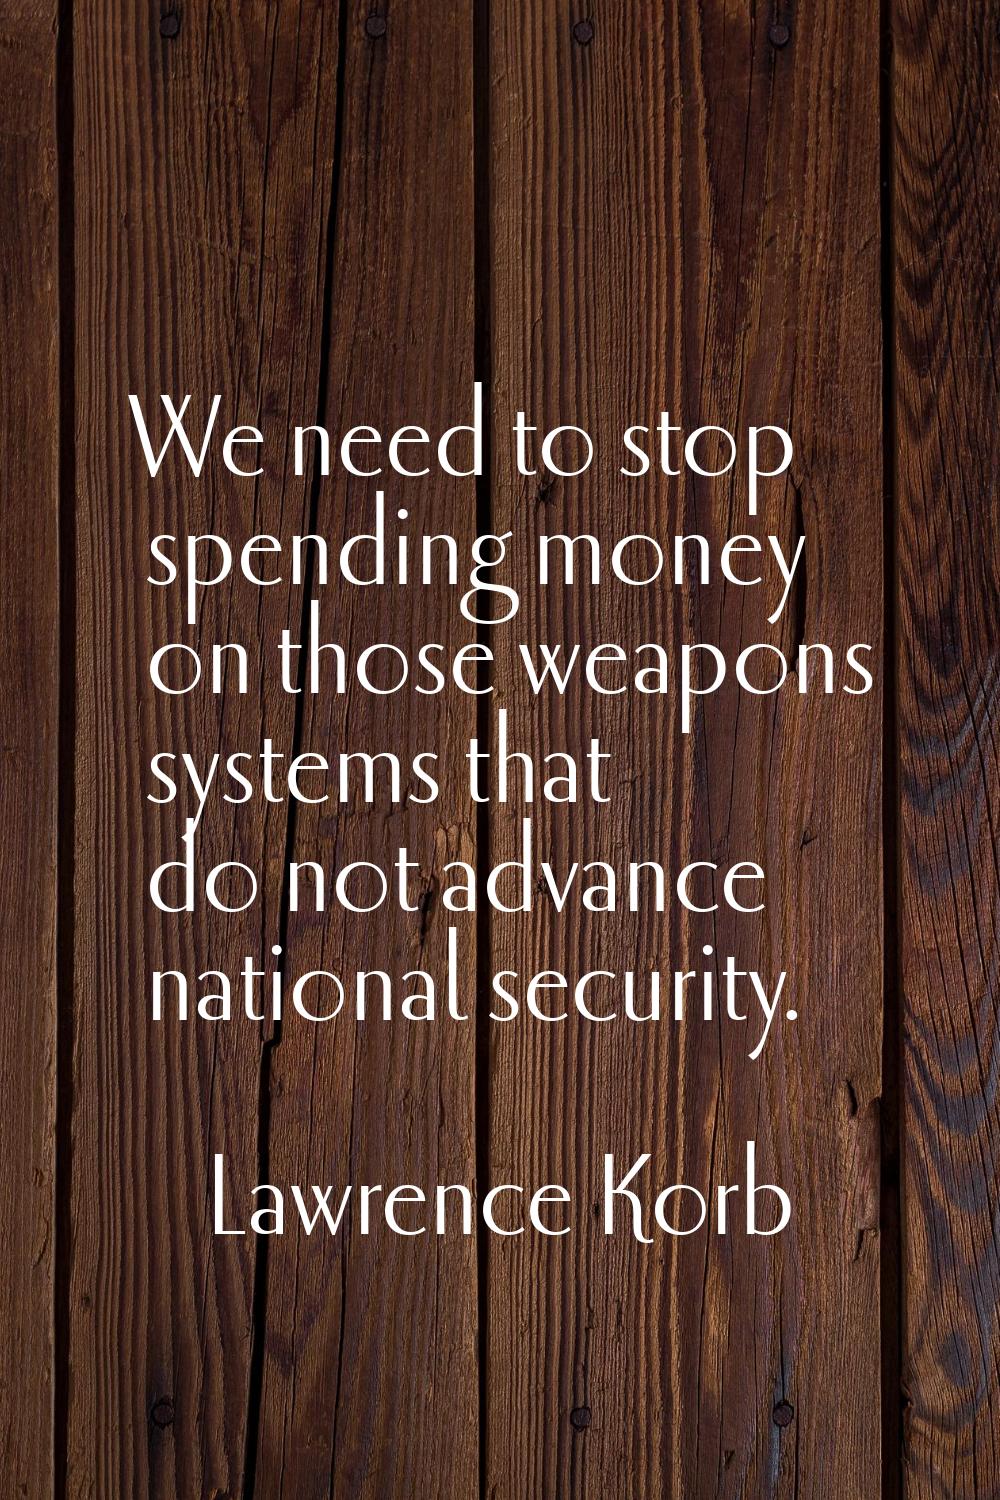 We need to stop spending money on those weapons systems that do not advance national security.